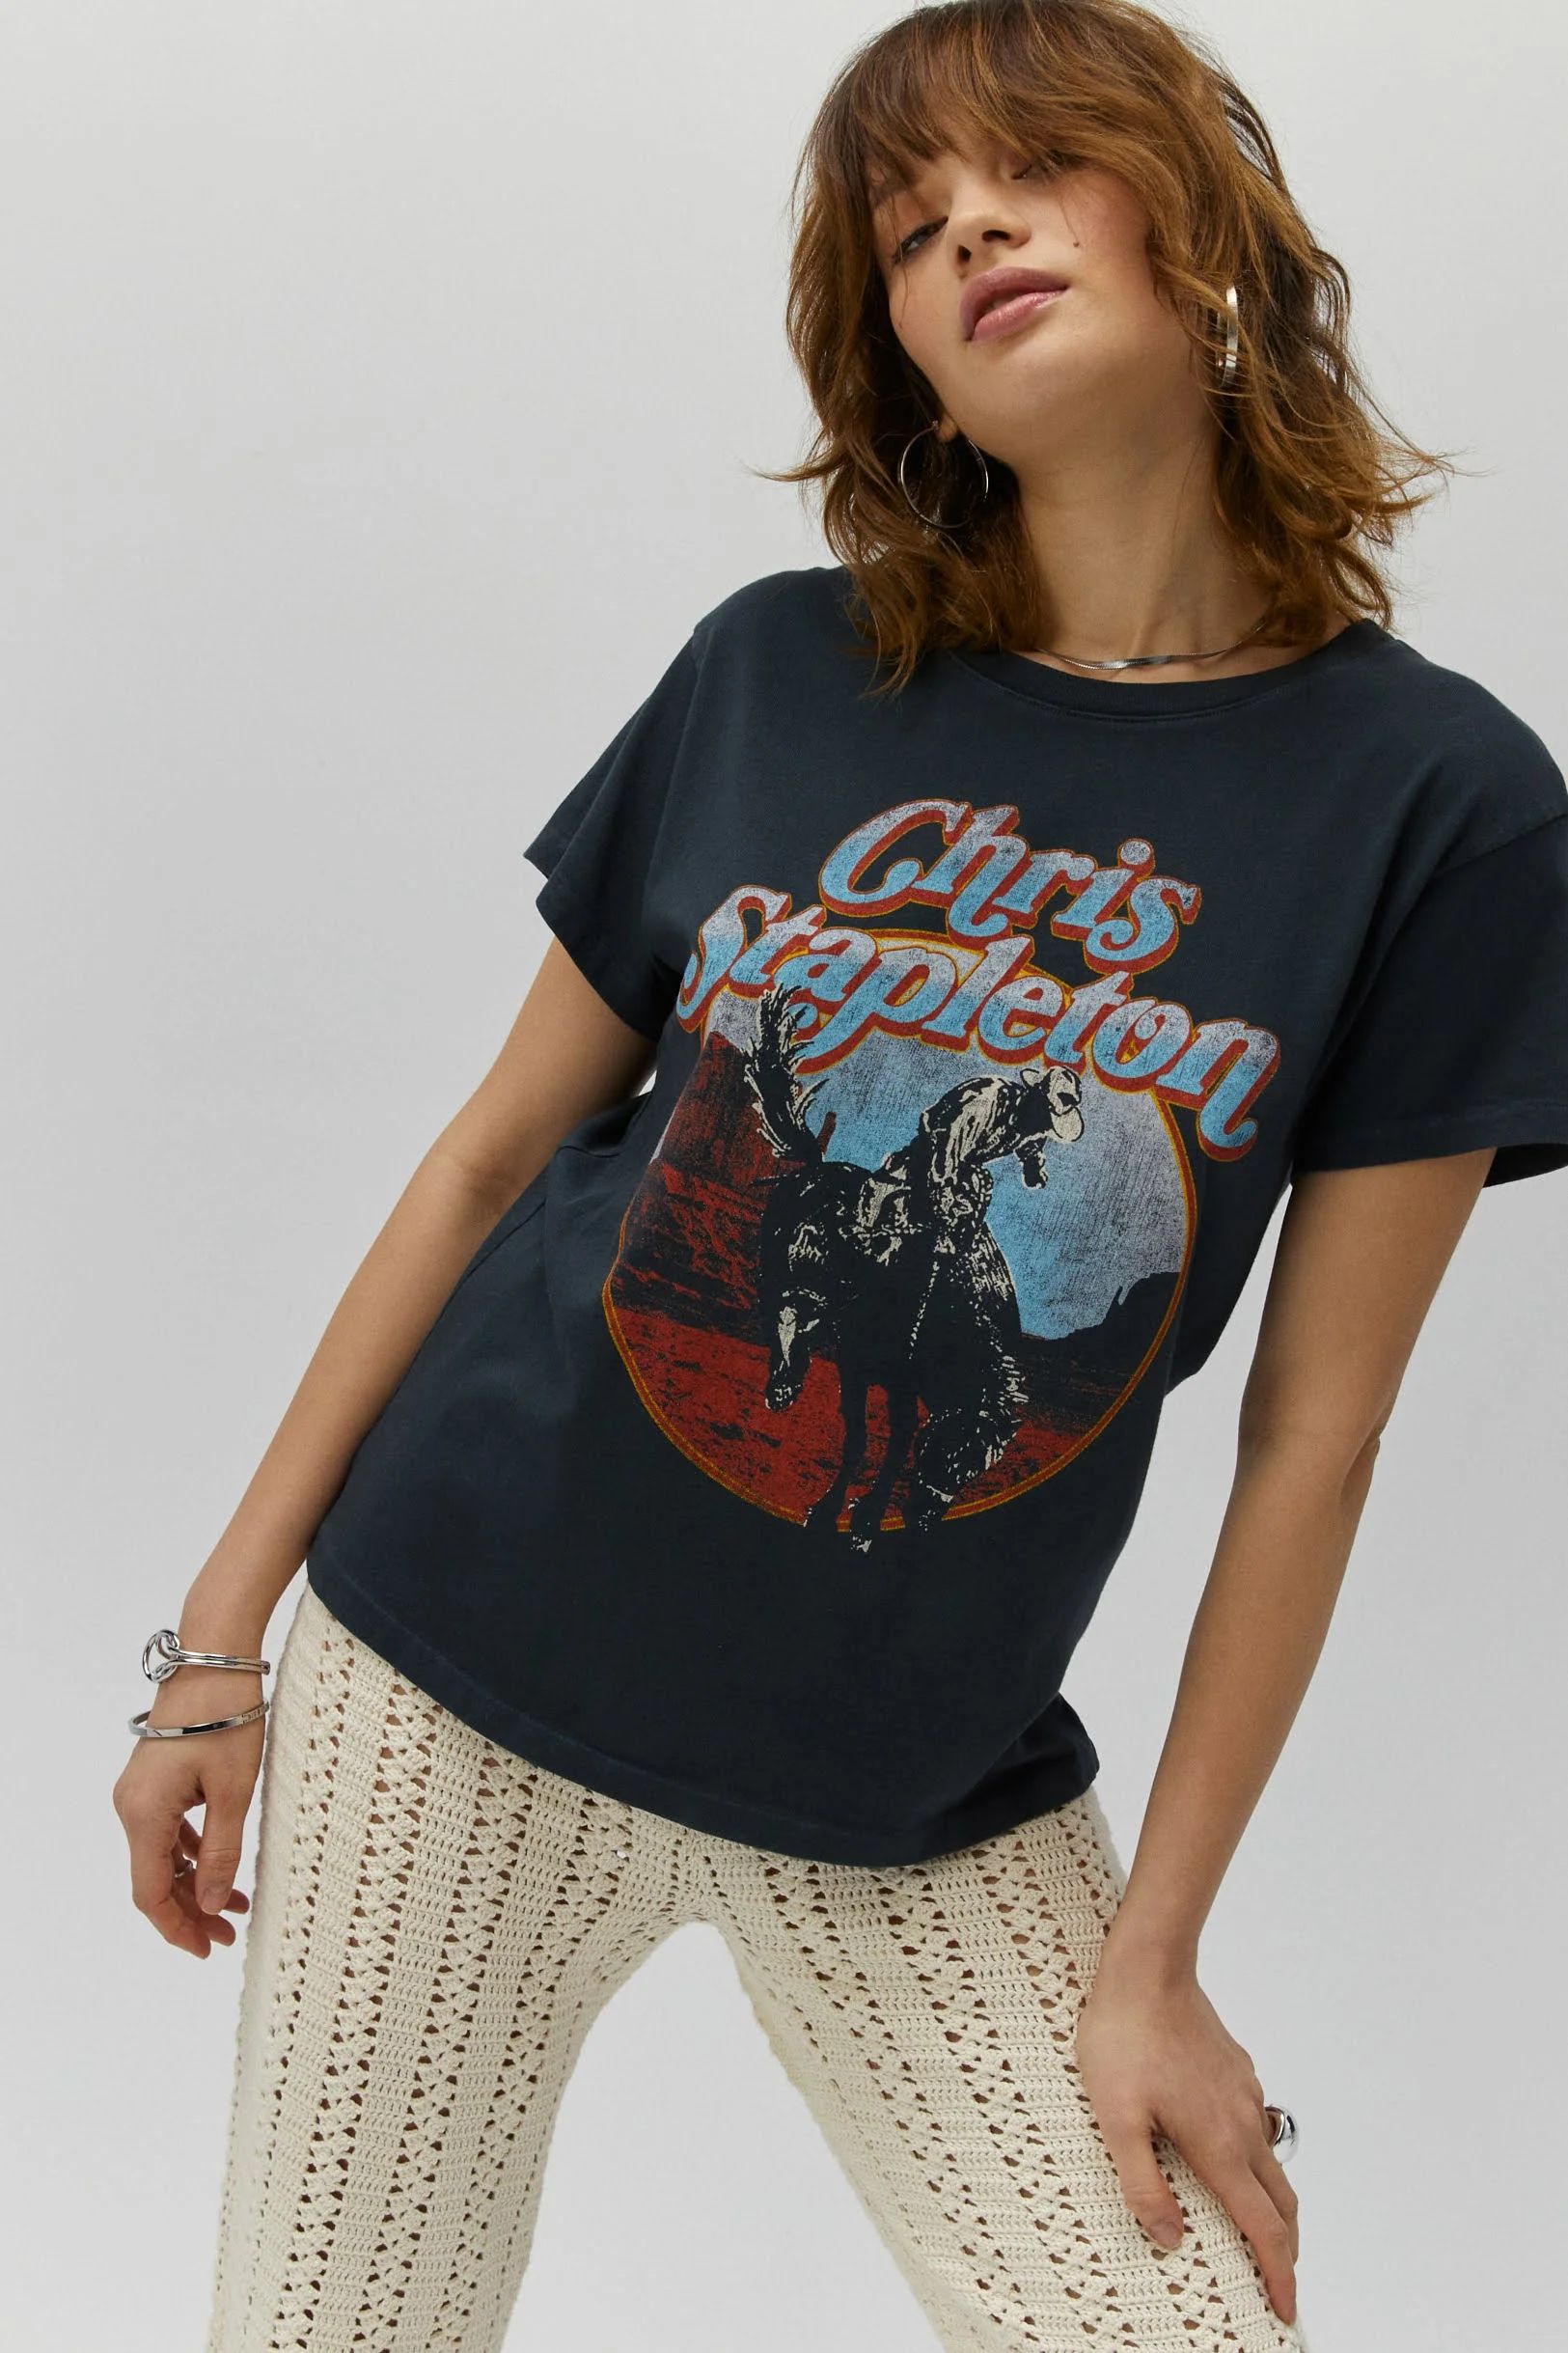 Chris Stapleton Horse And Canyons Tour Tee | Daydreamer